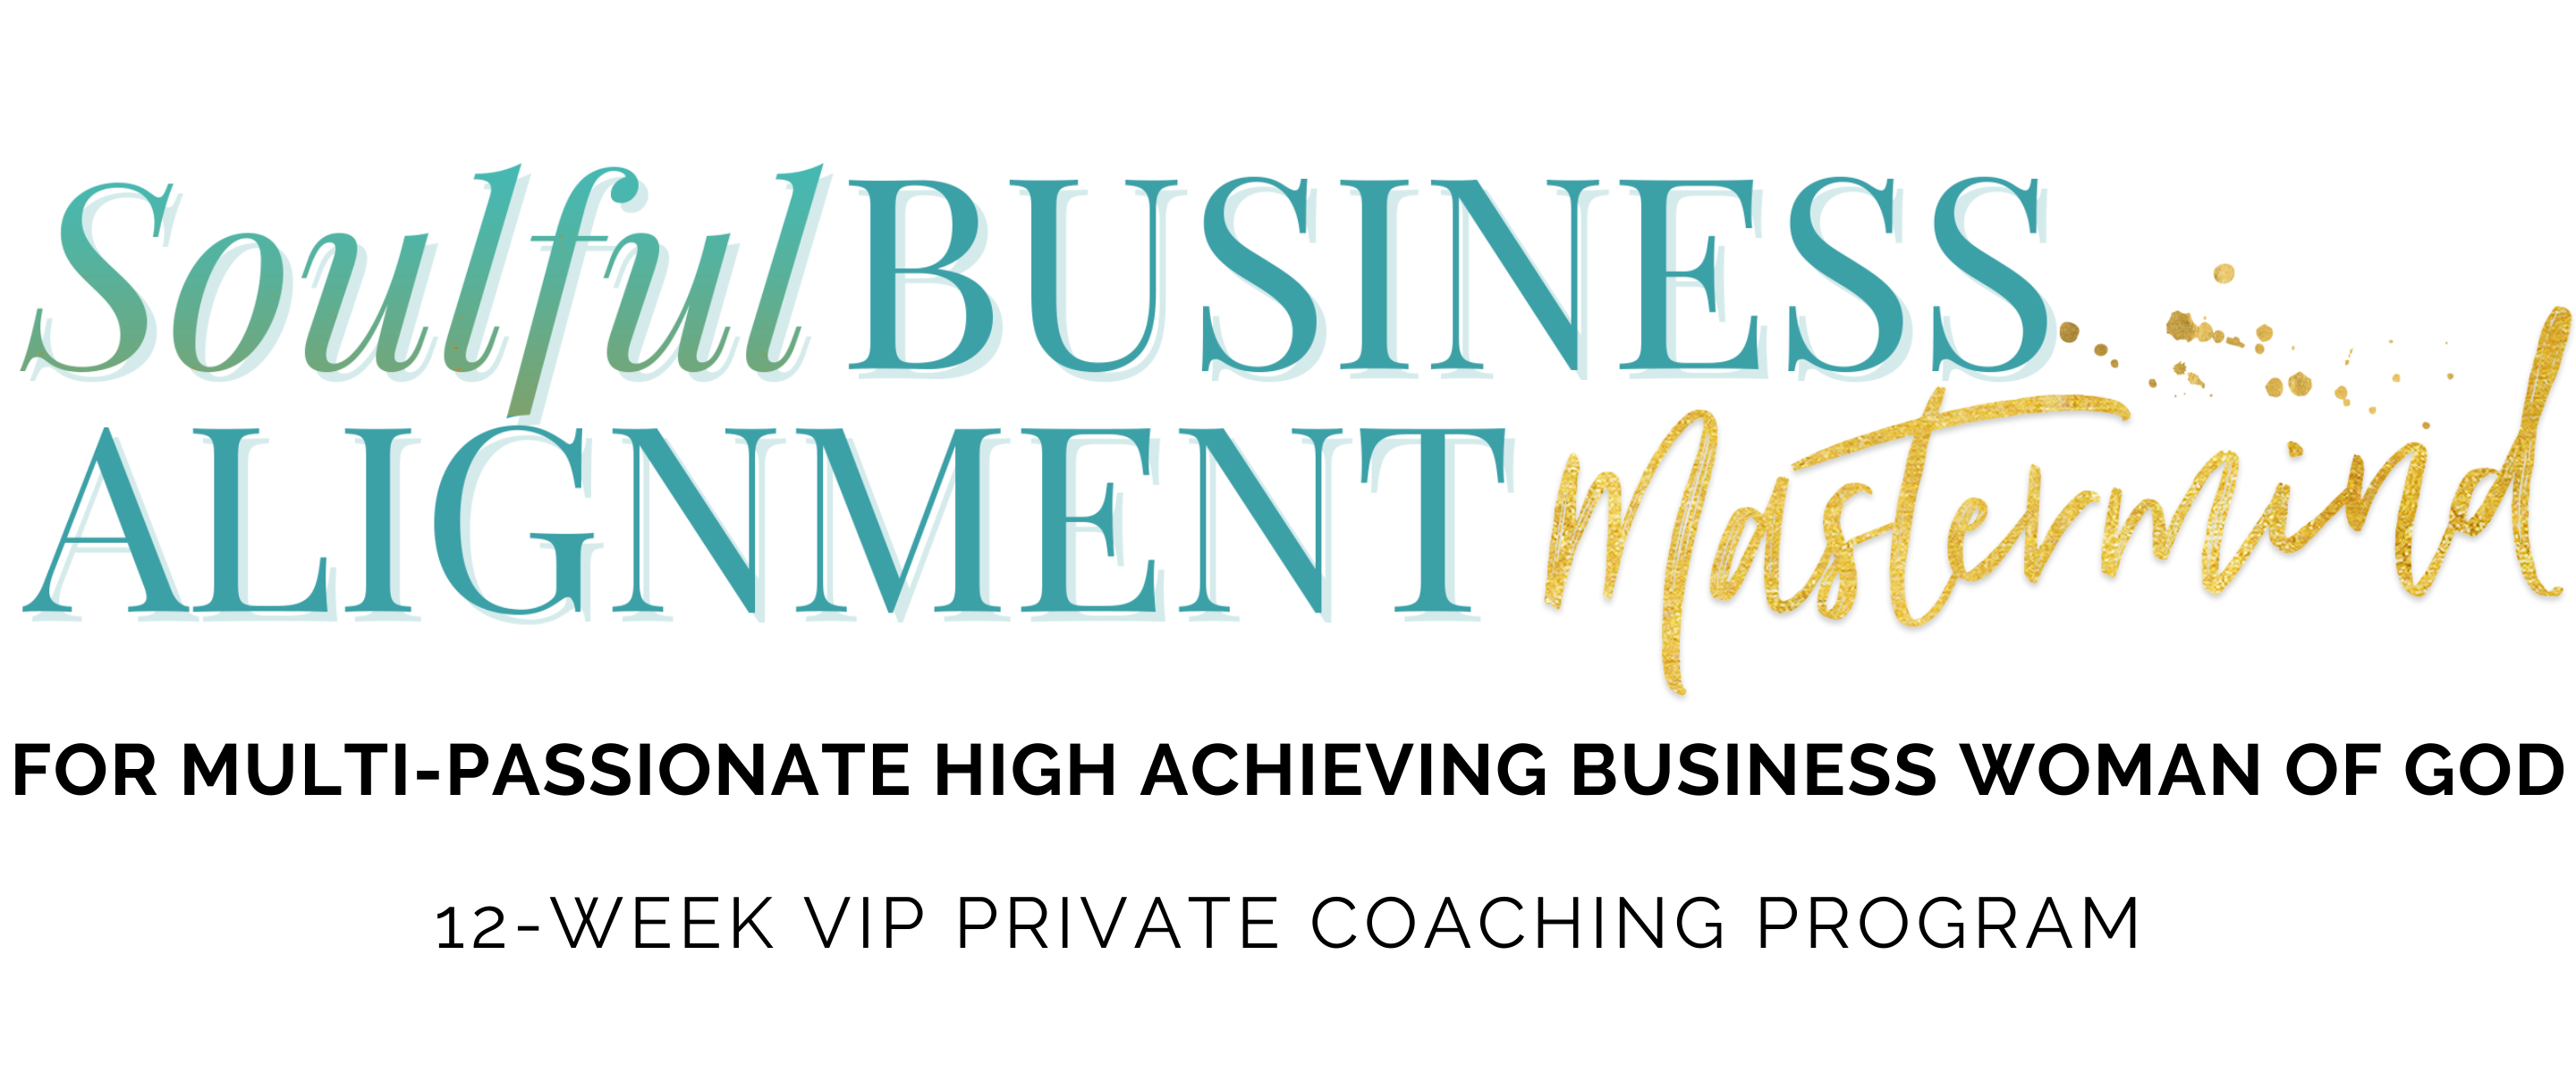 Soulful Business Alignment Mastermind